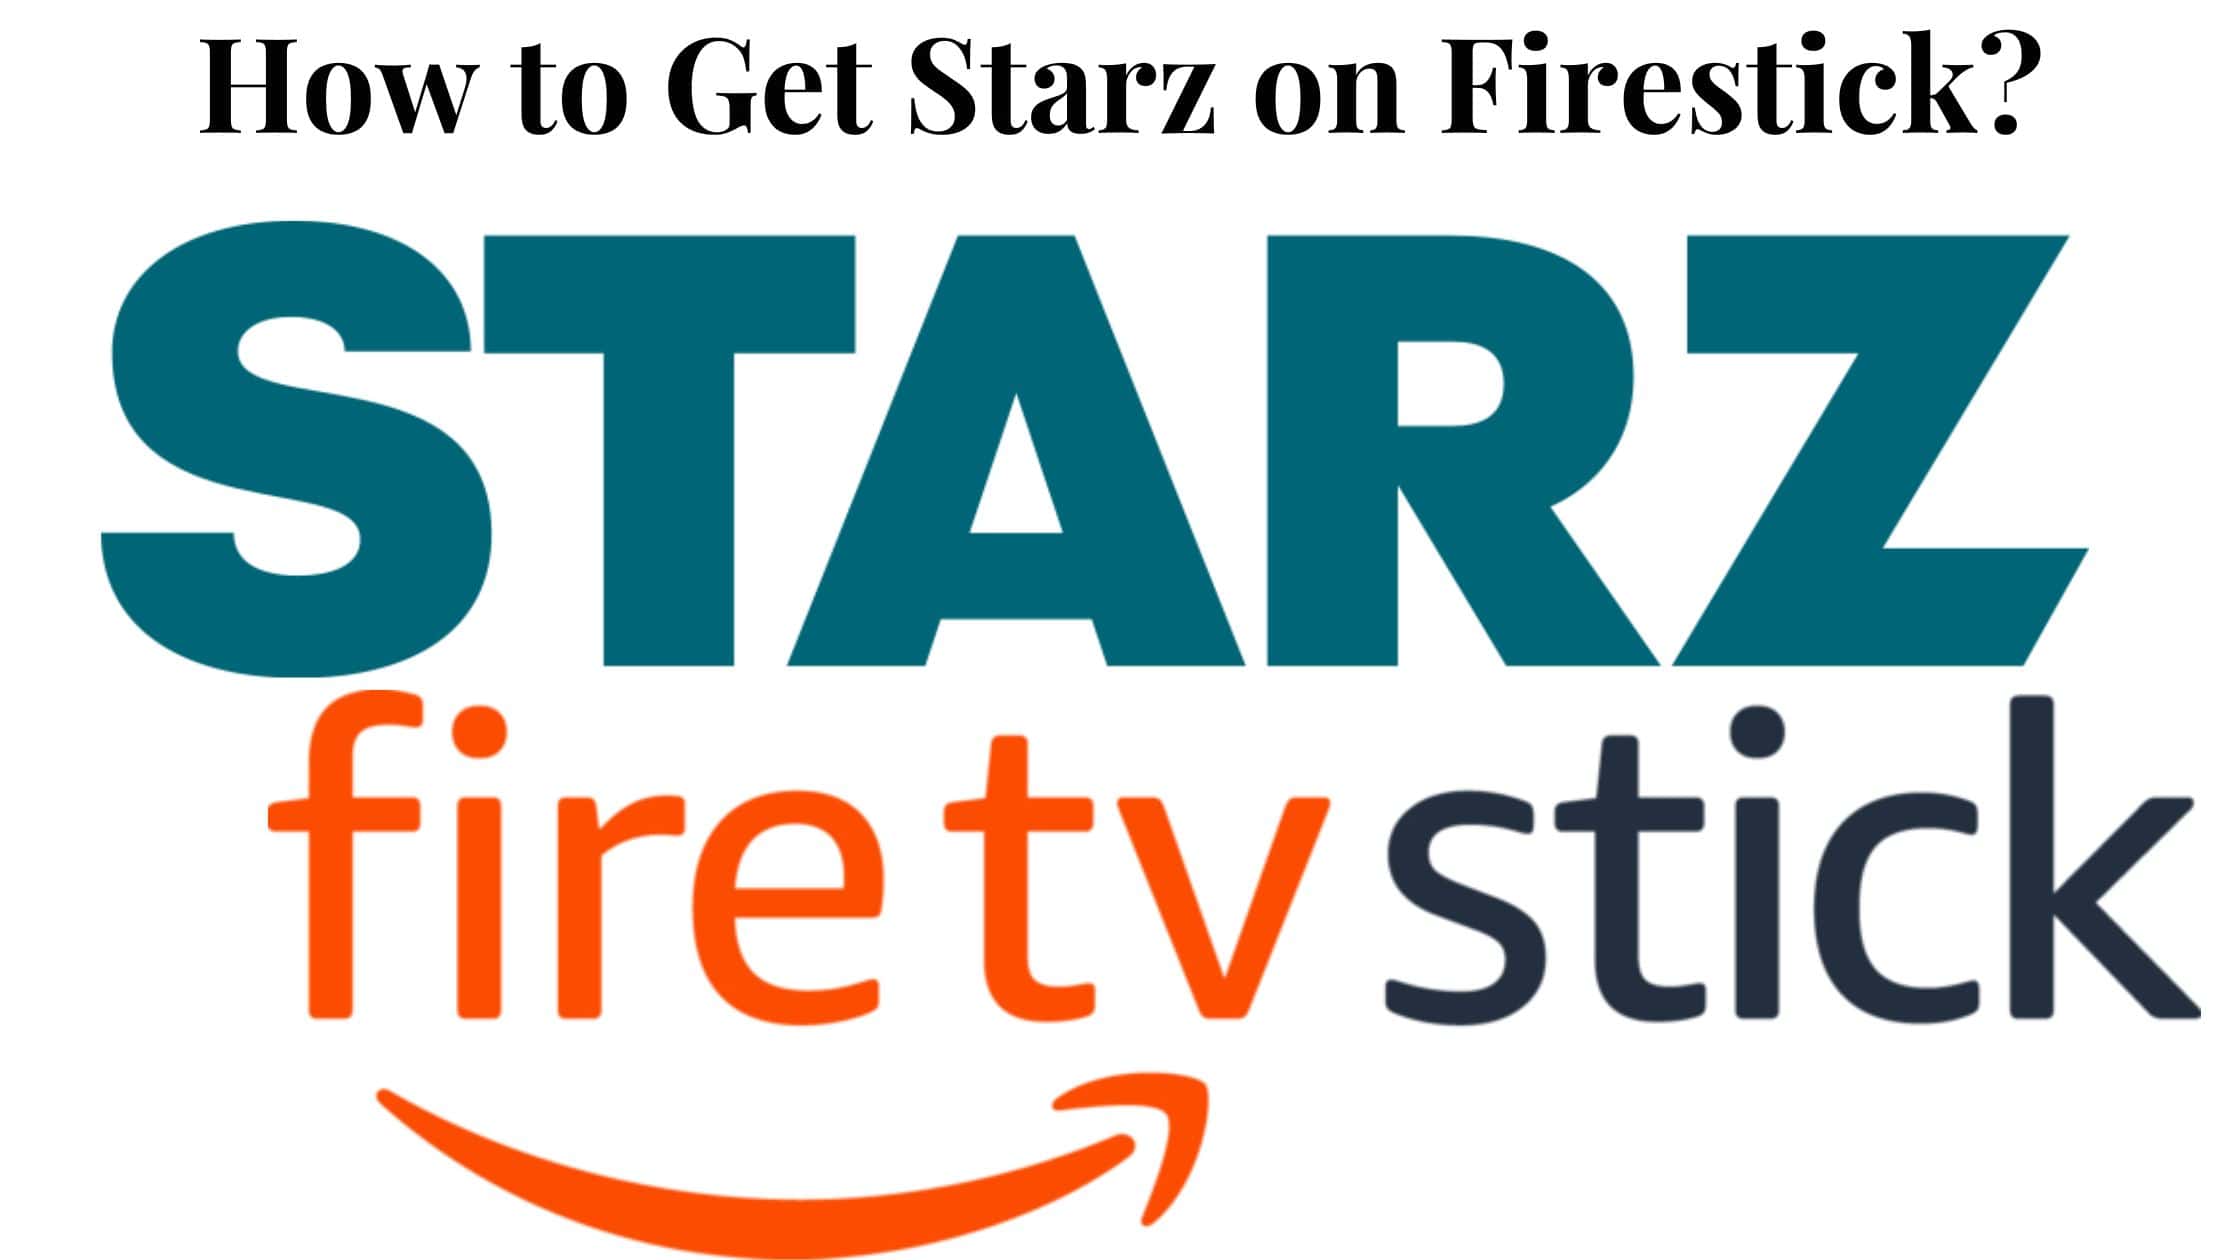 How to Get Starz on Firestick